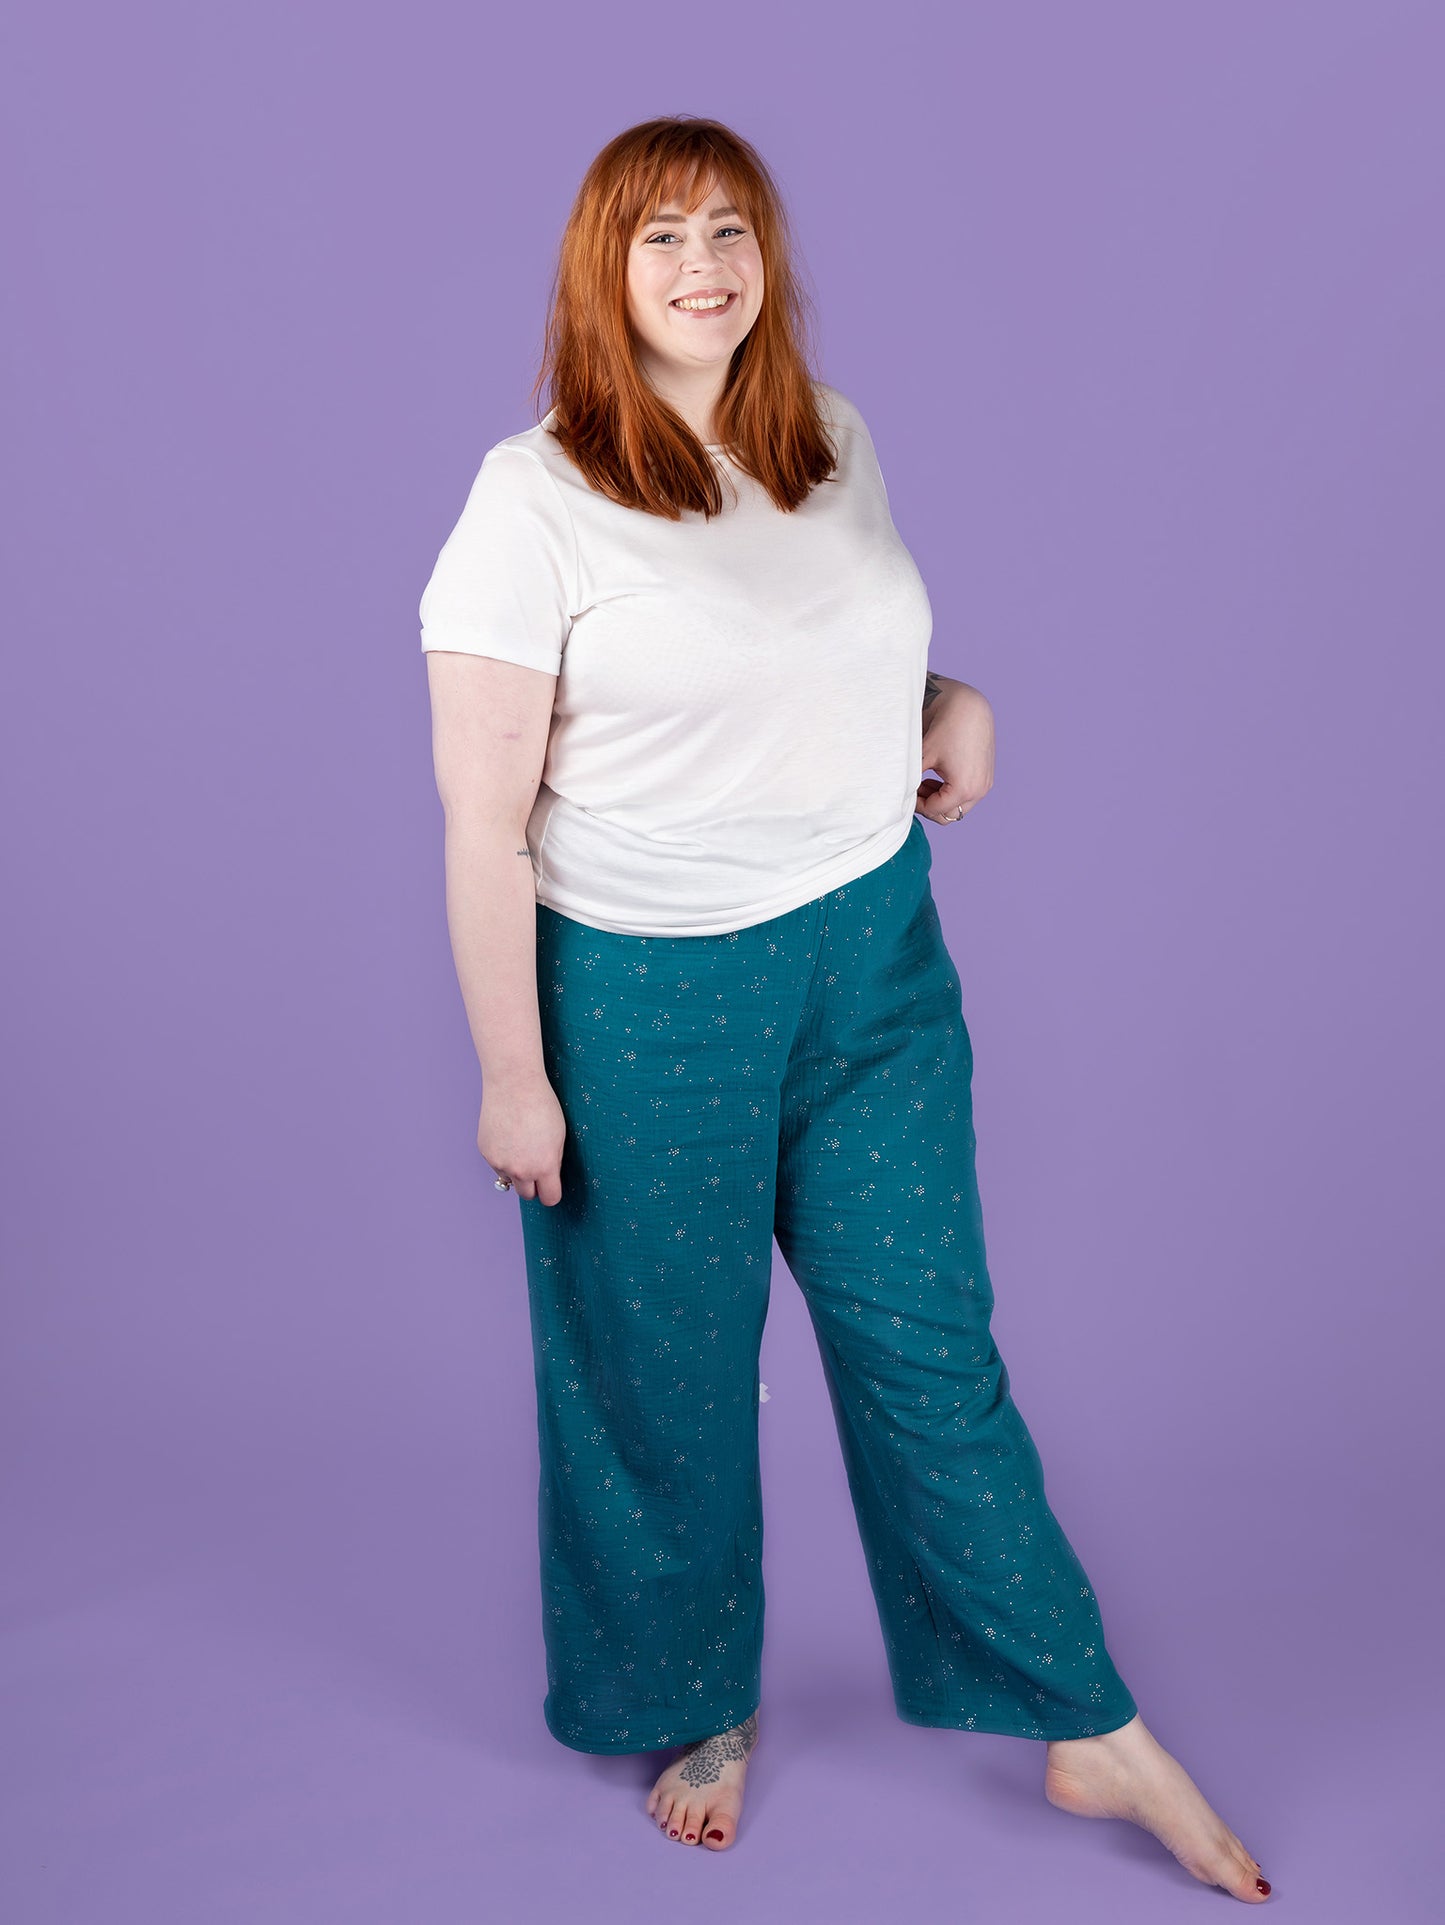 Jaime Pyjama Bottoms and Shorts by Tilly and The Buttons